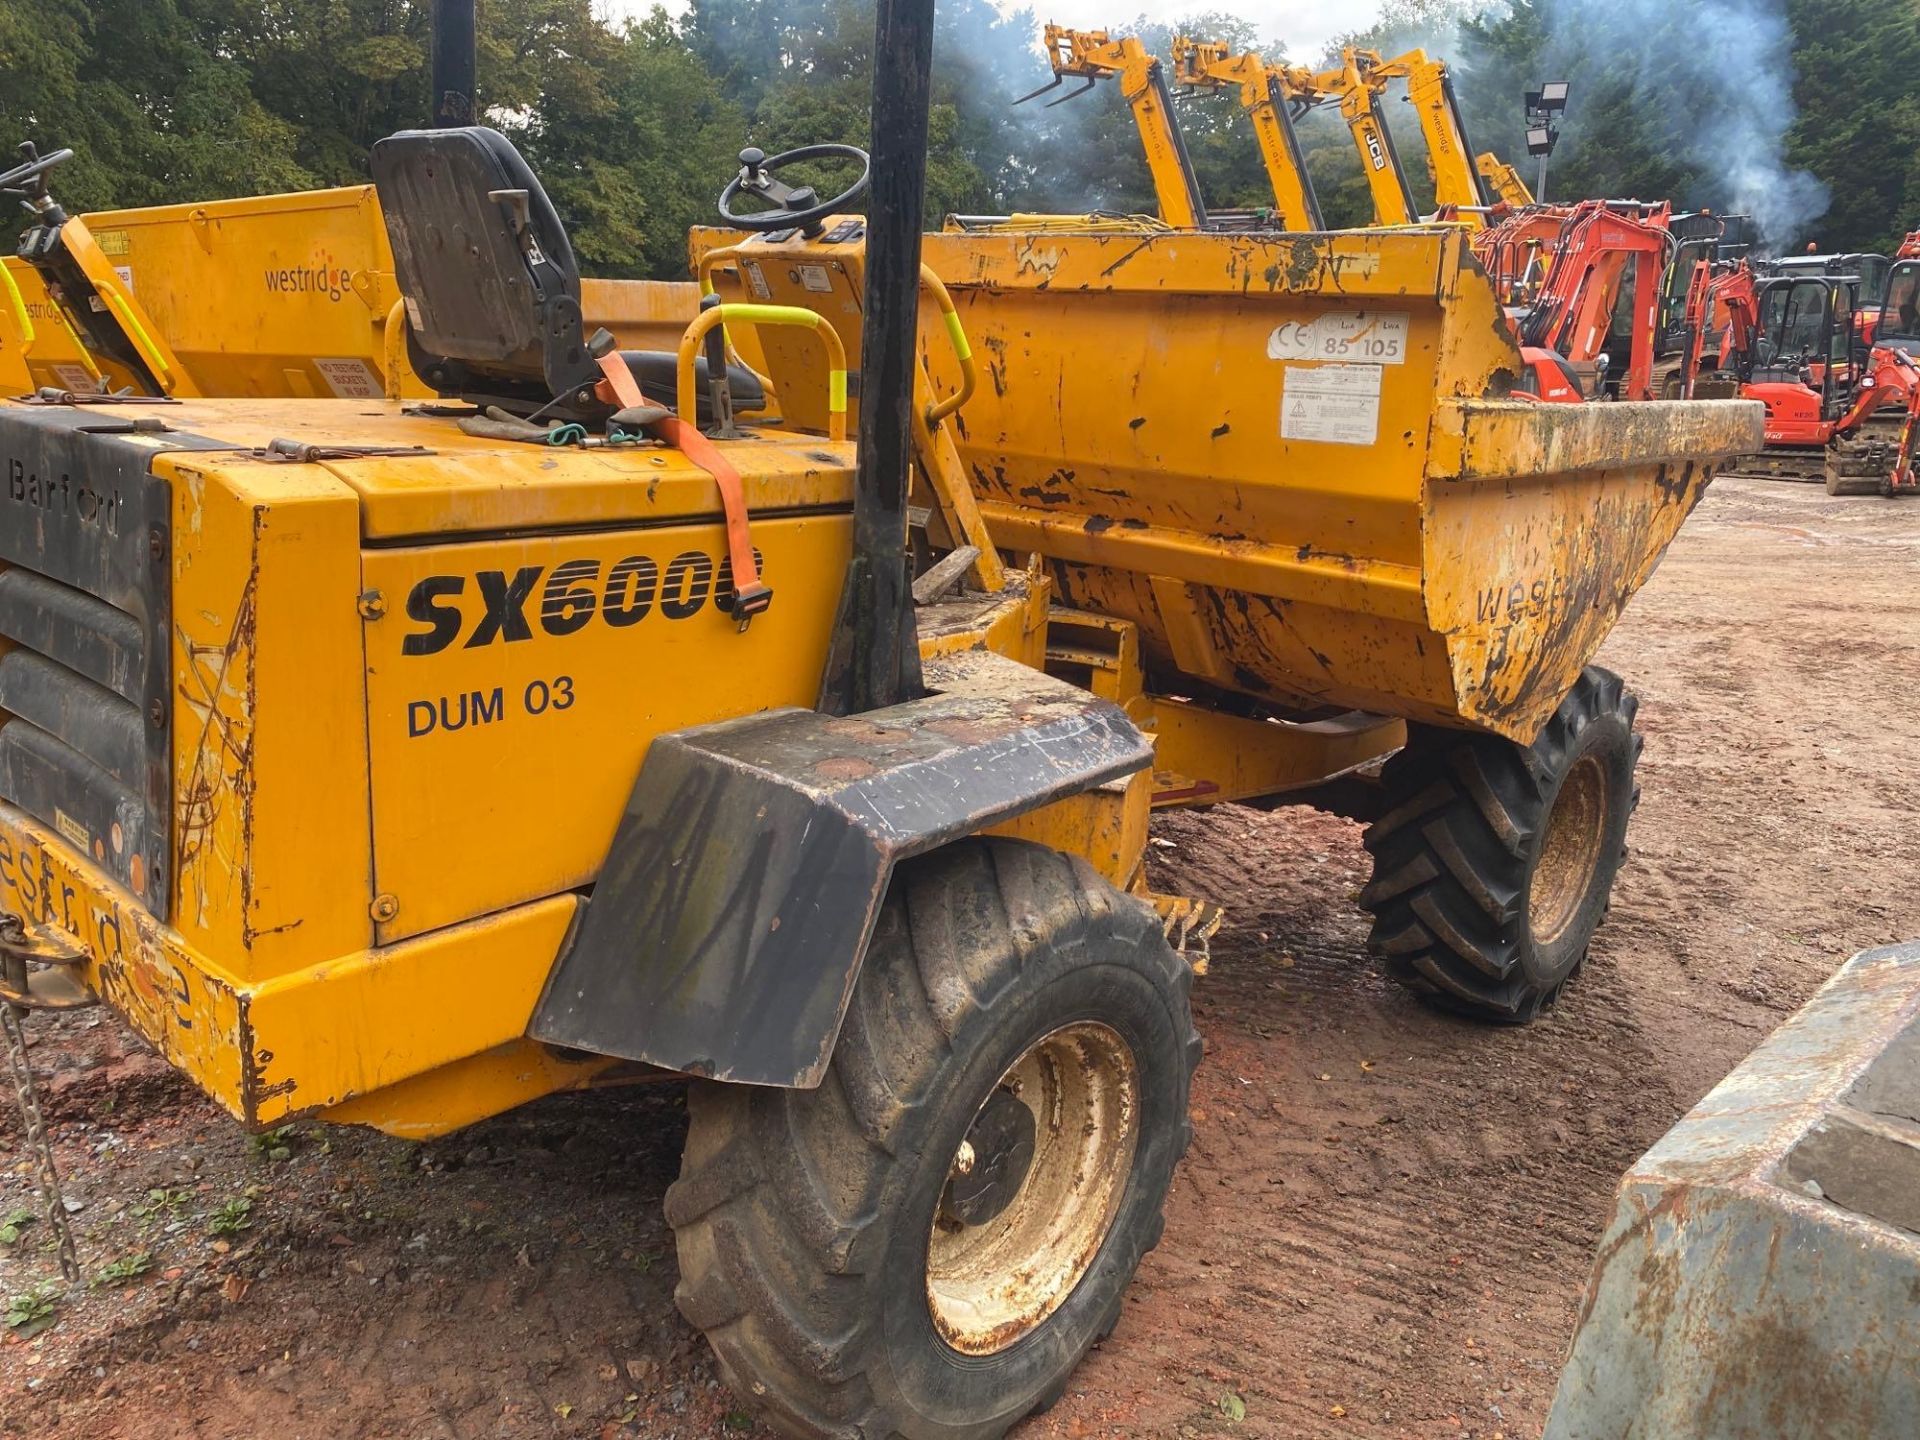 Bamford 6 tonne articulated site dumper type SX6000, max unladen 4080Kg, rated capacity 6000Kg, - Image 3 of 9